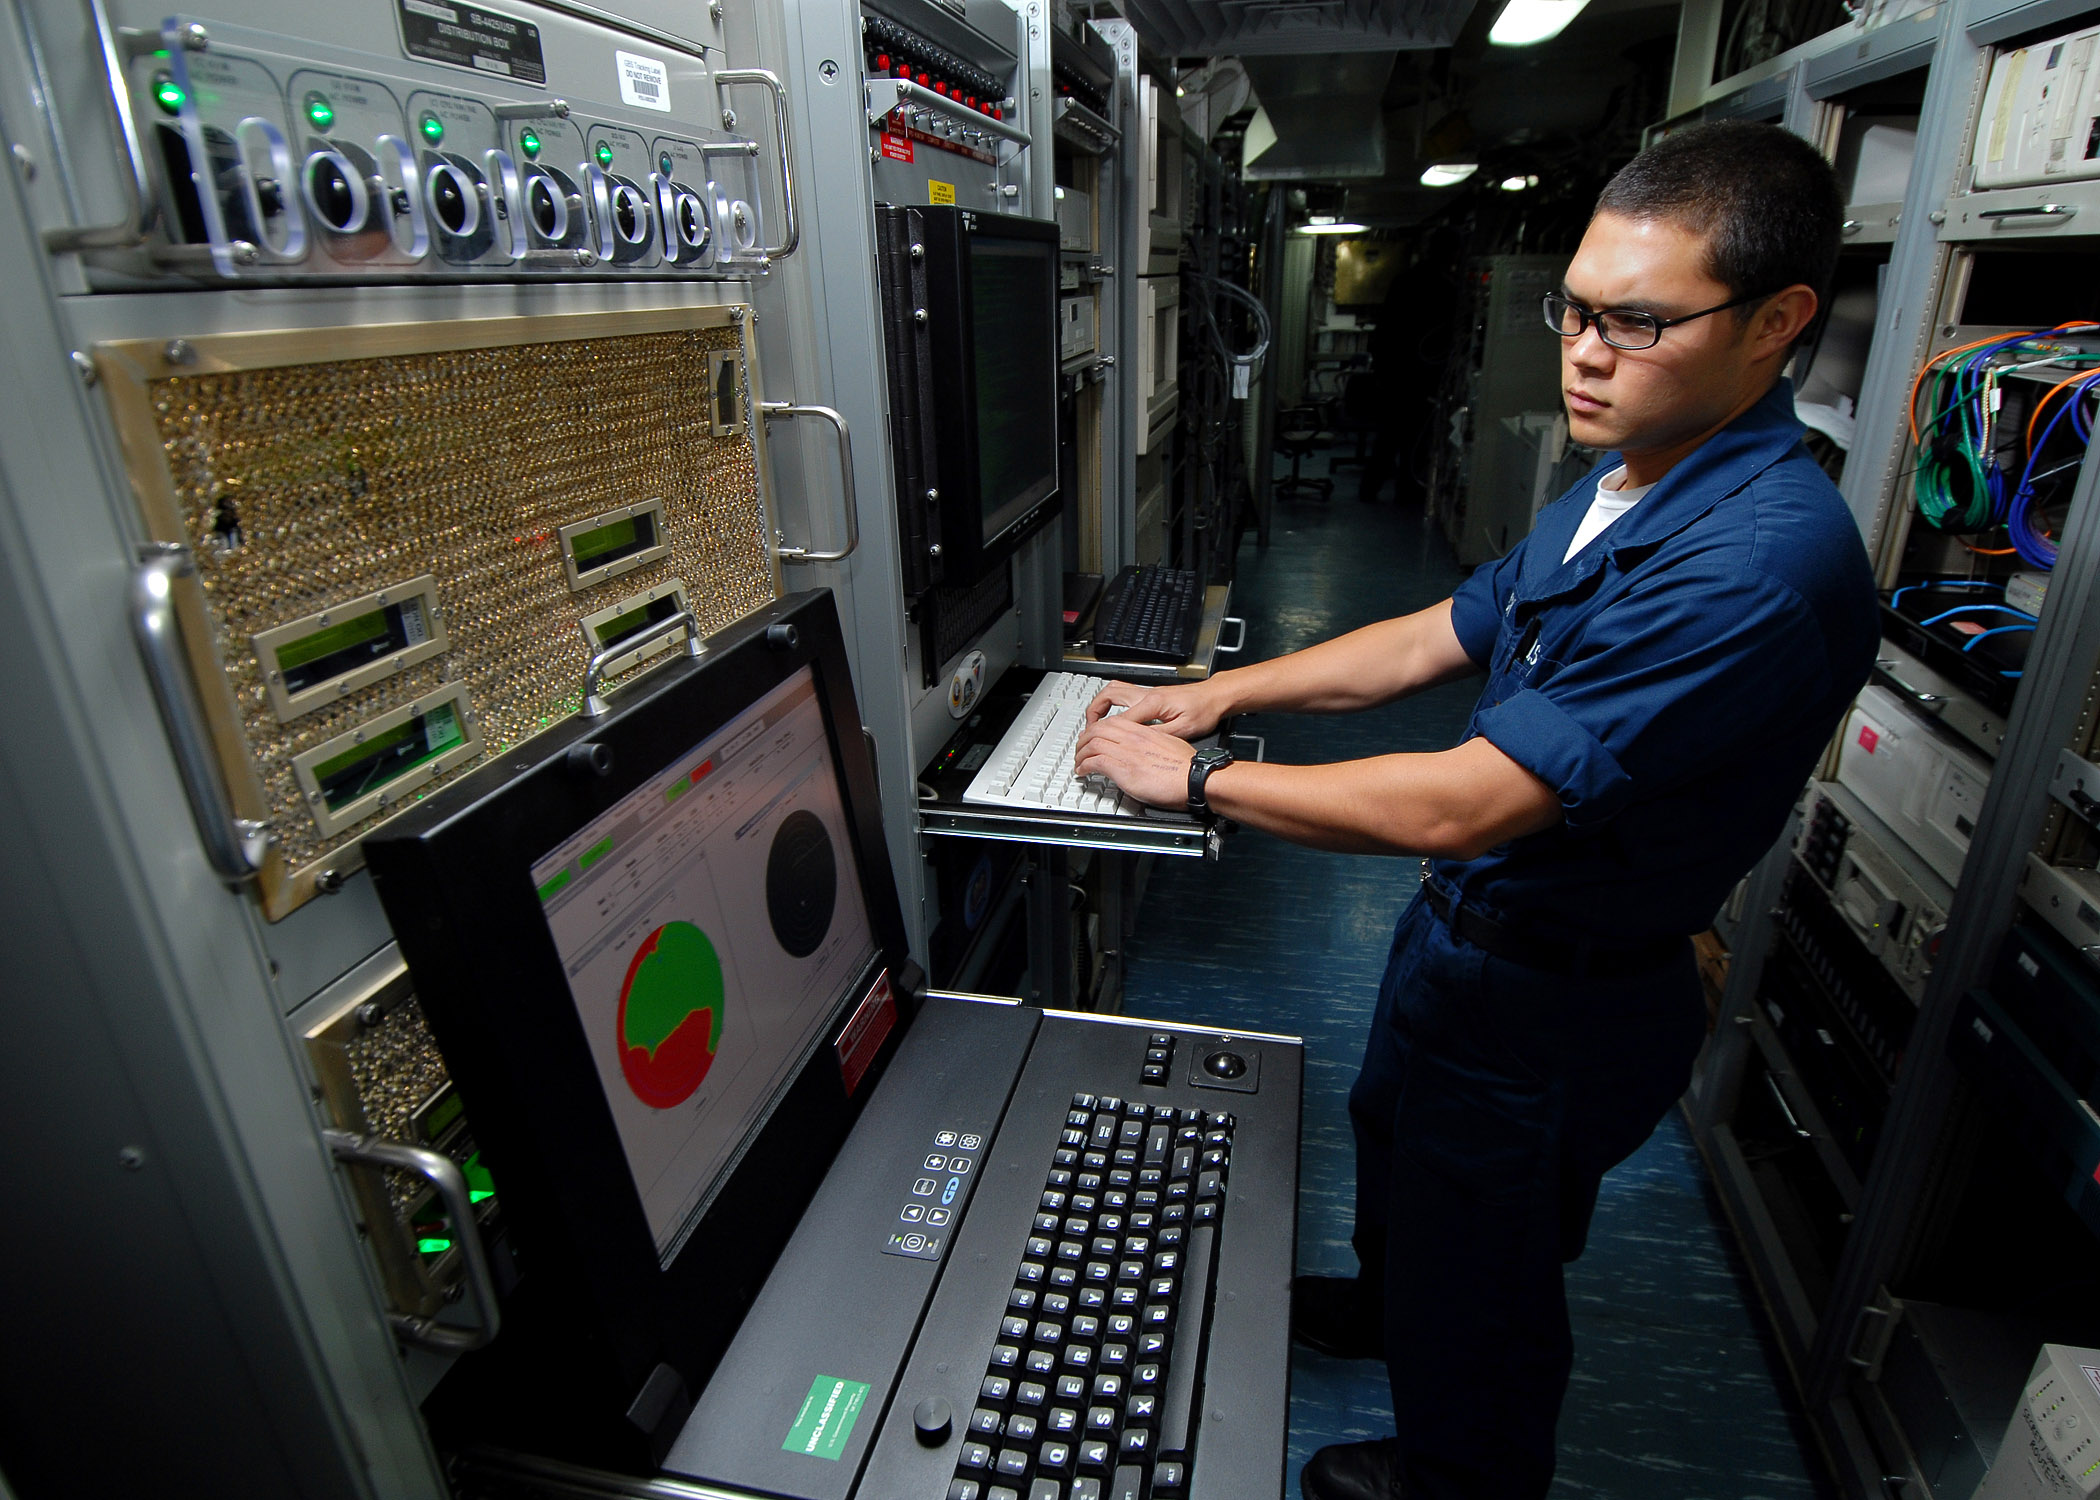 A Navy seaman monitors the ship's Automated Digital Networking System using general Digital rack mount displays